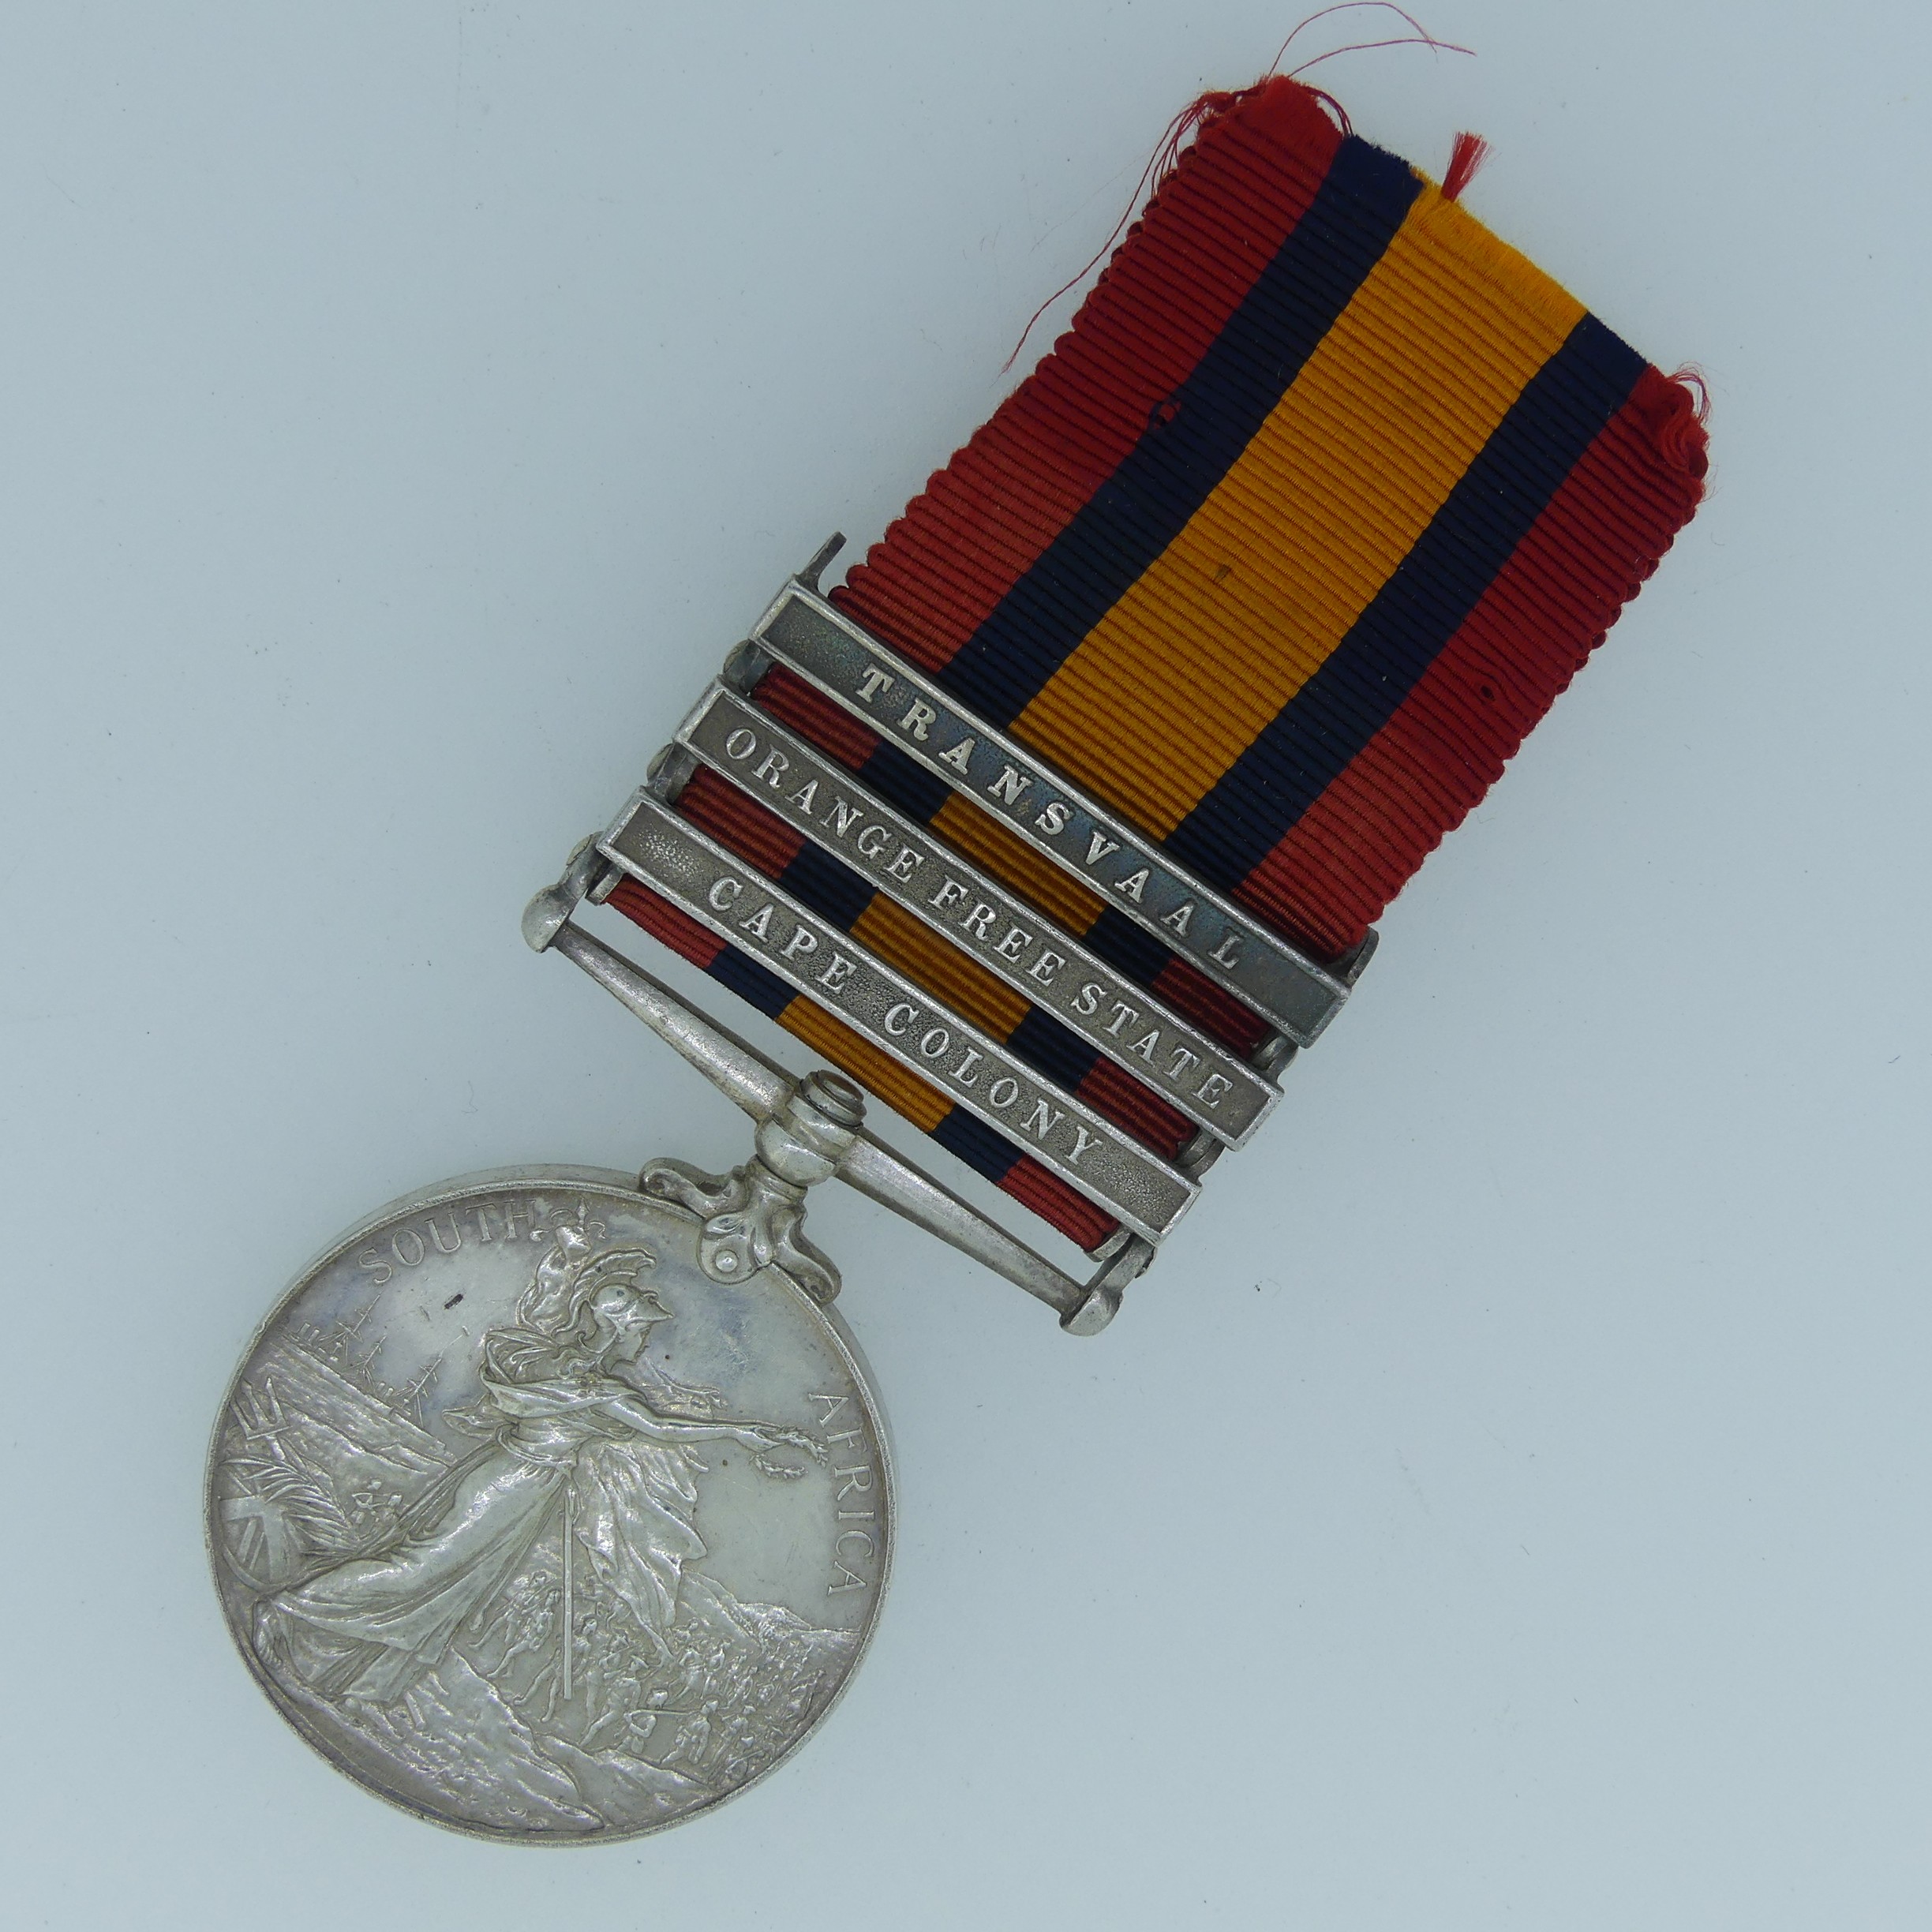 Queen's South Africa Medal (Three clasps: Transvaal, Orange Free State, Cape Colony) 6842 Pte T.